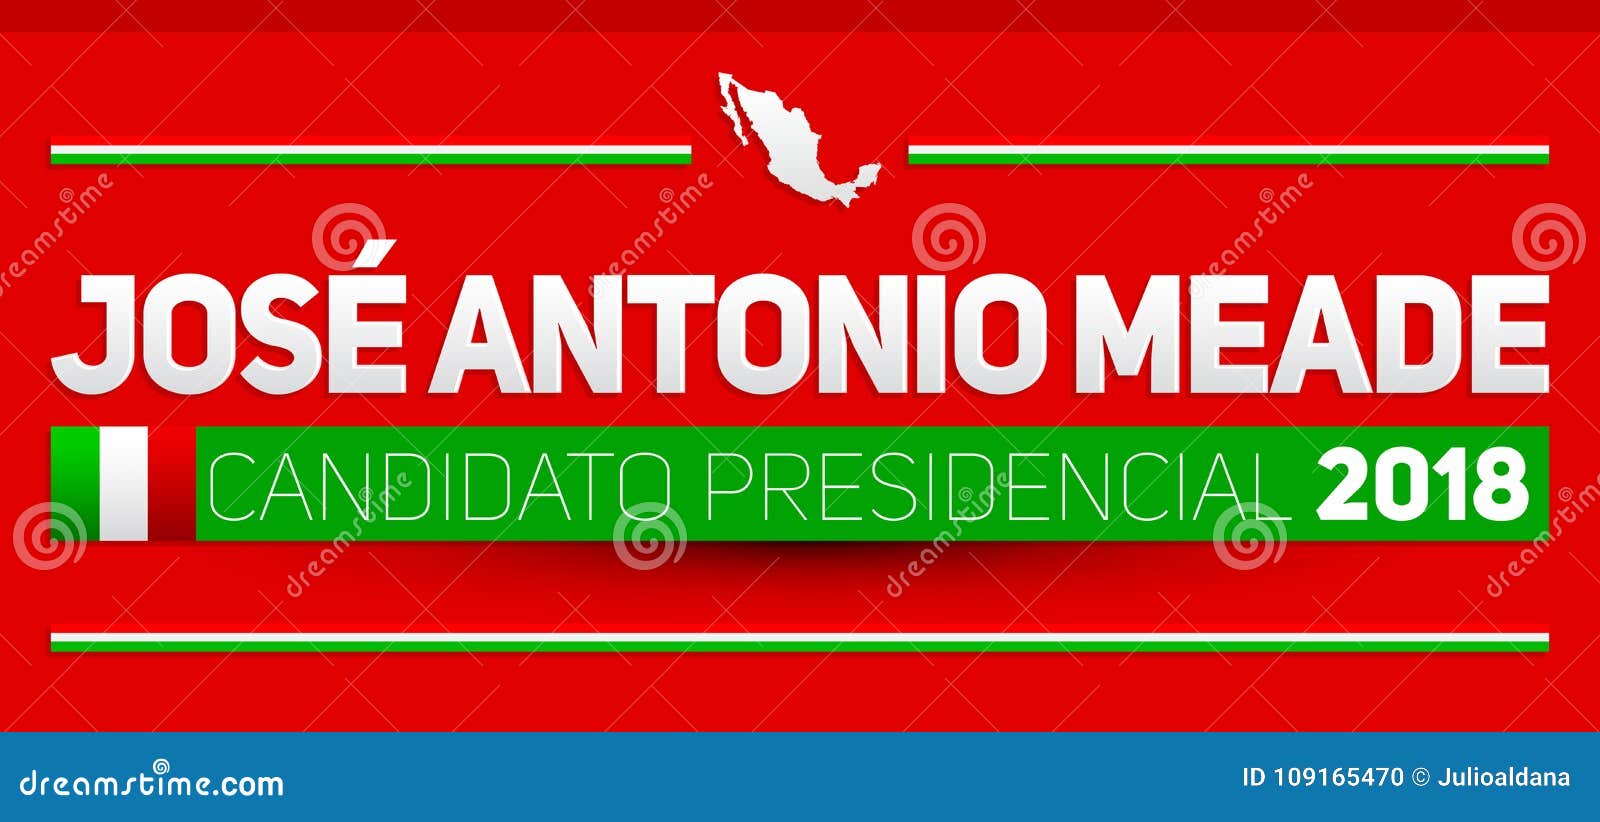 candidato presidencial 2018, presidential candidate 2018 spanish text, mexican elections